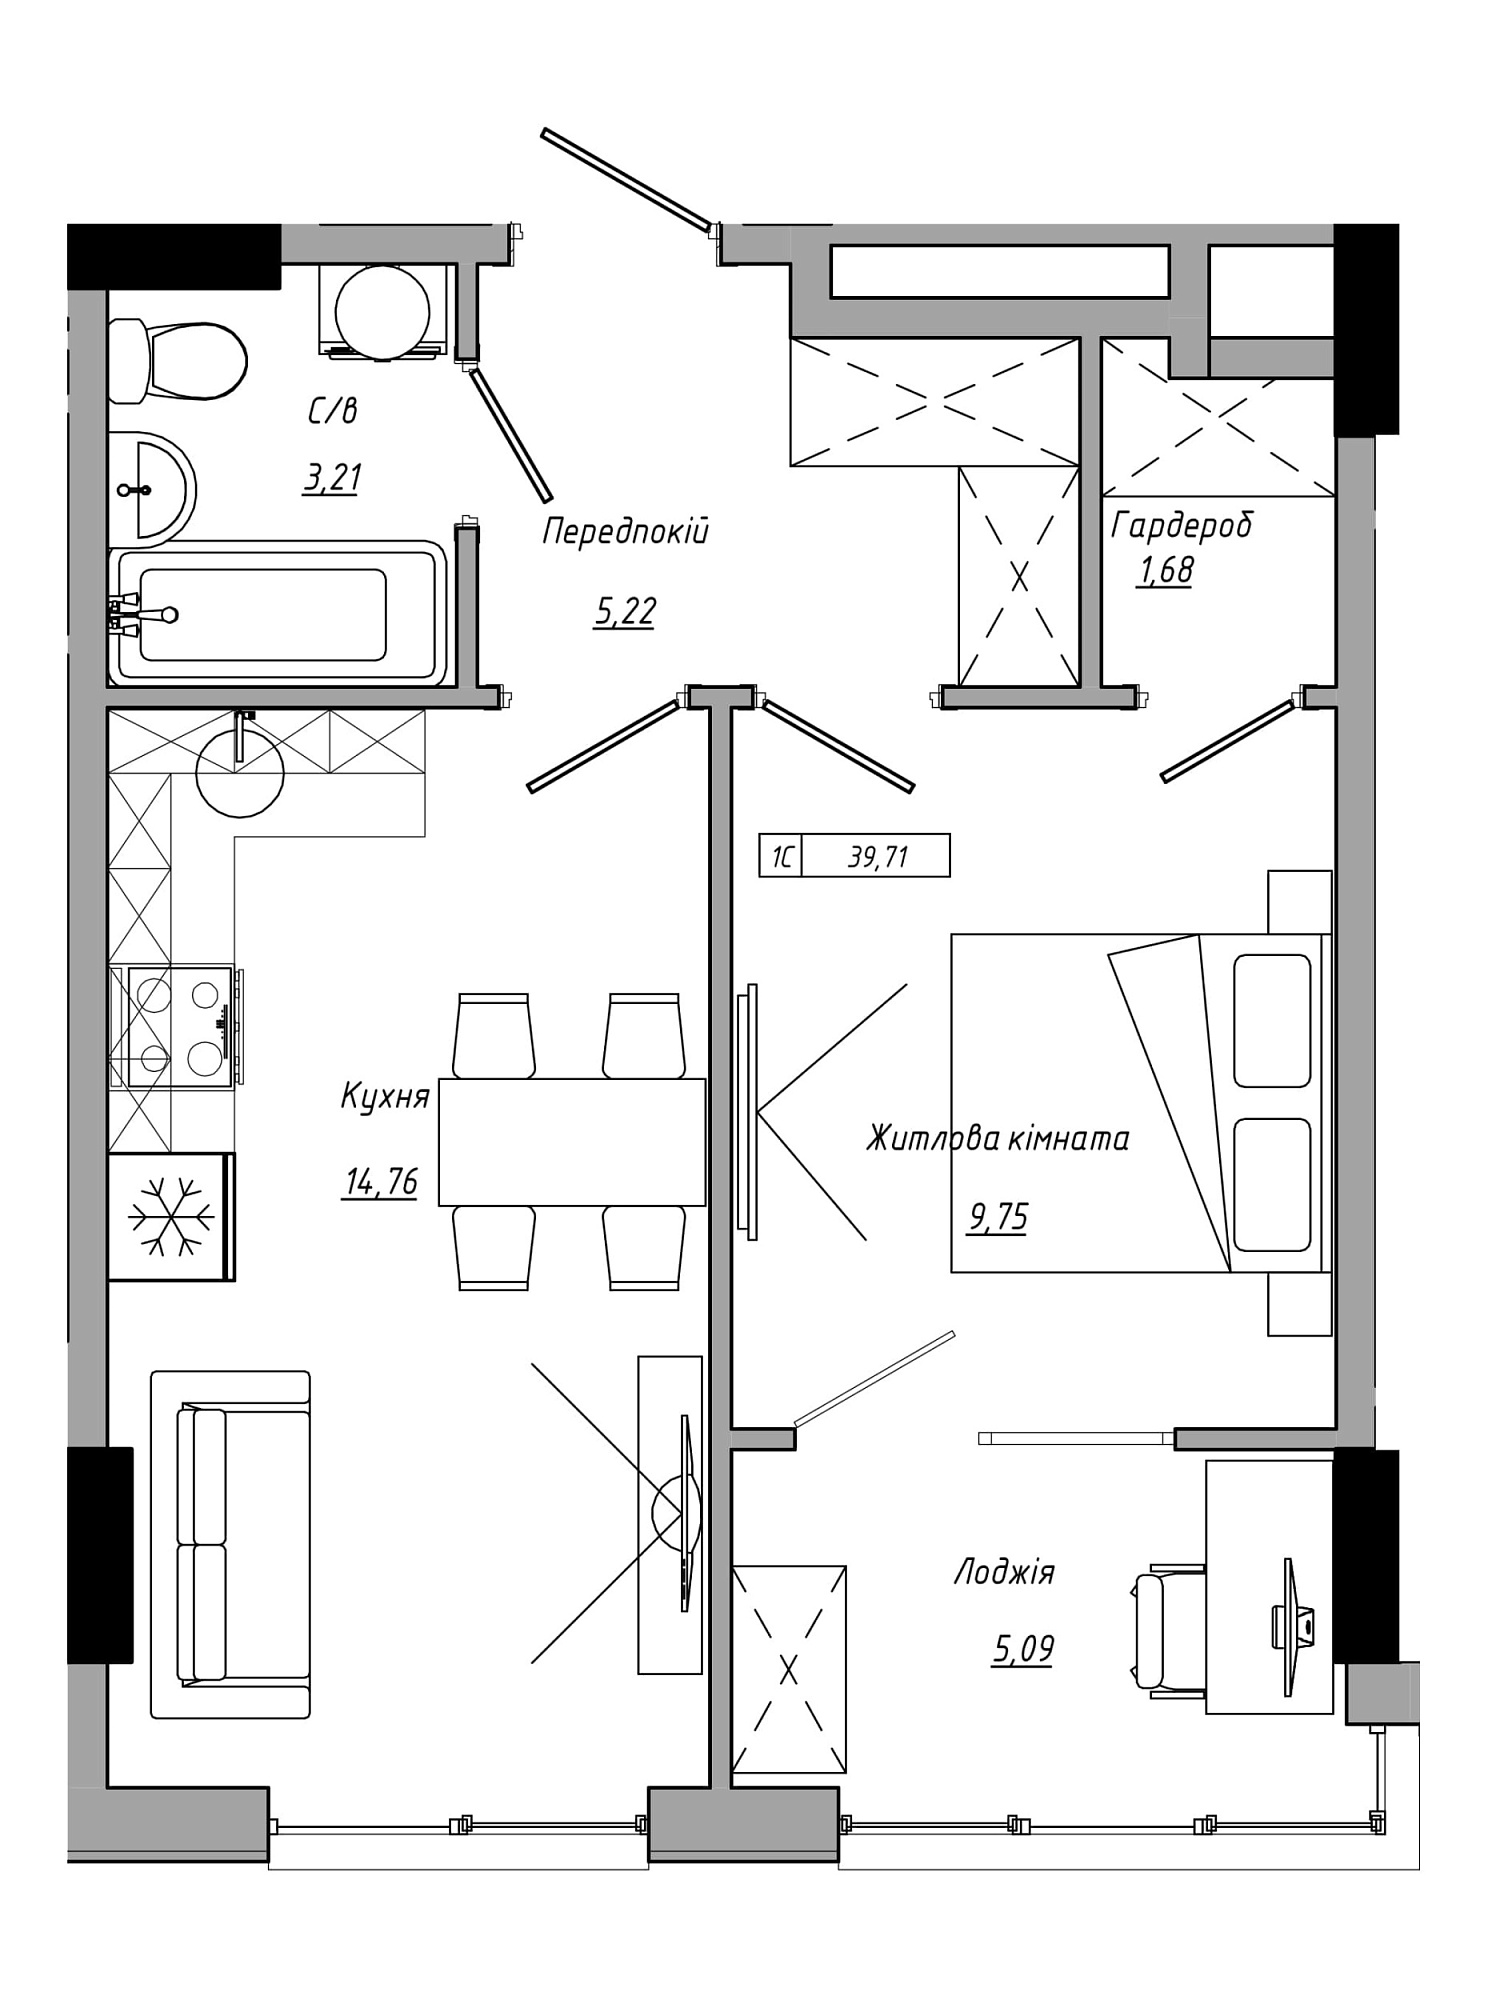 Planning 1-rm flats area 39.71m2, AB-21-07/00021.